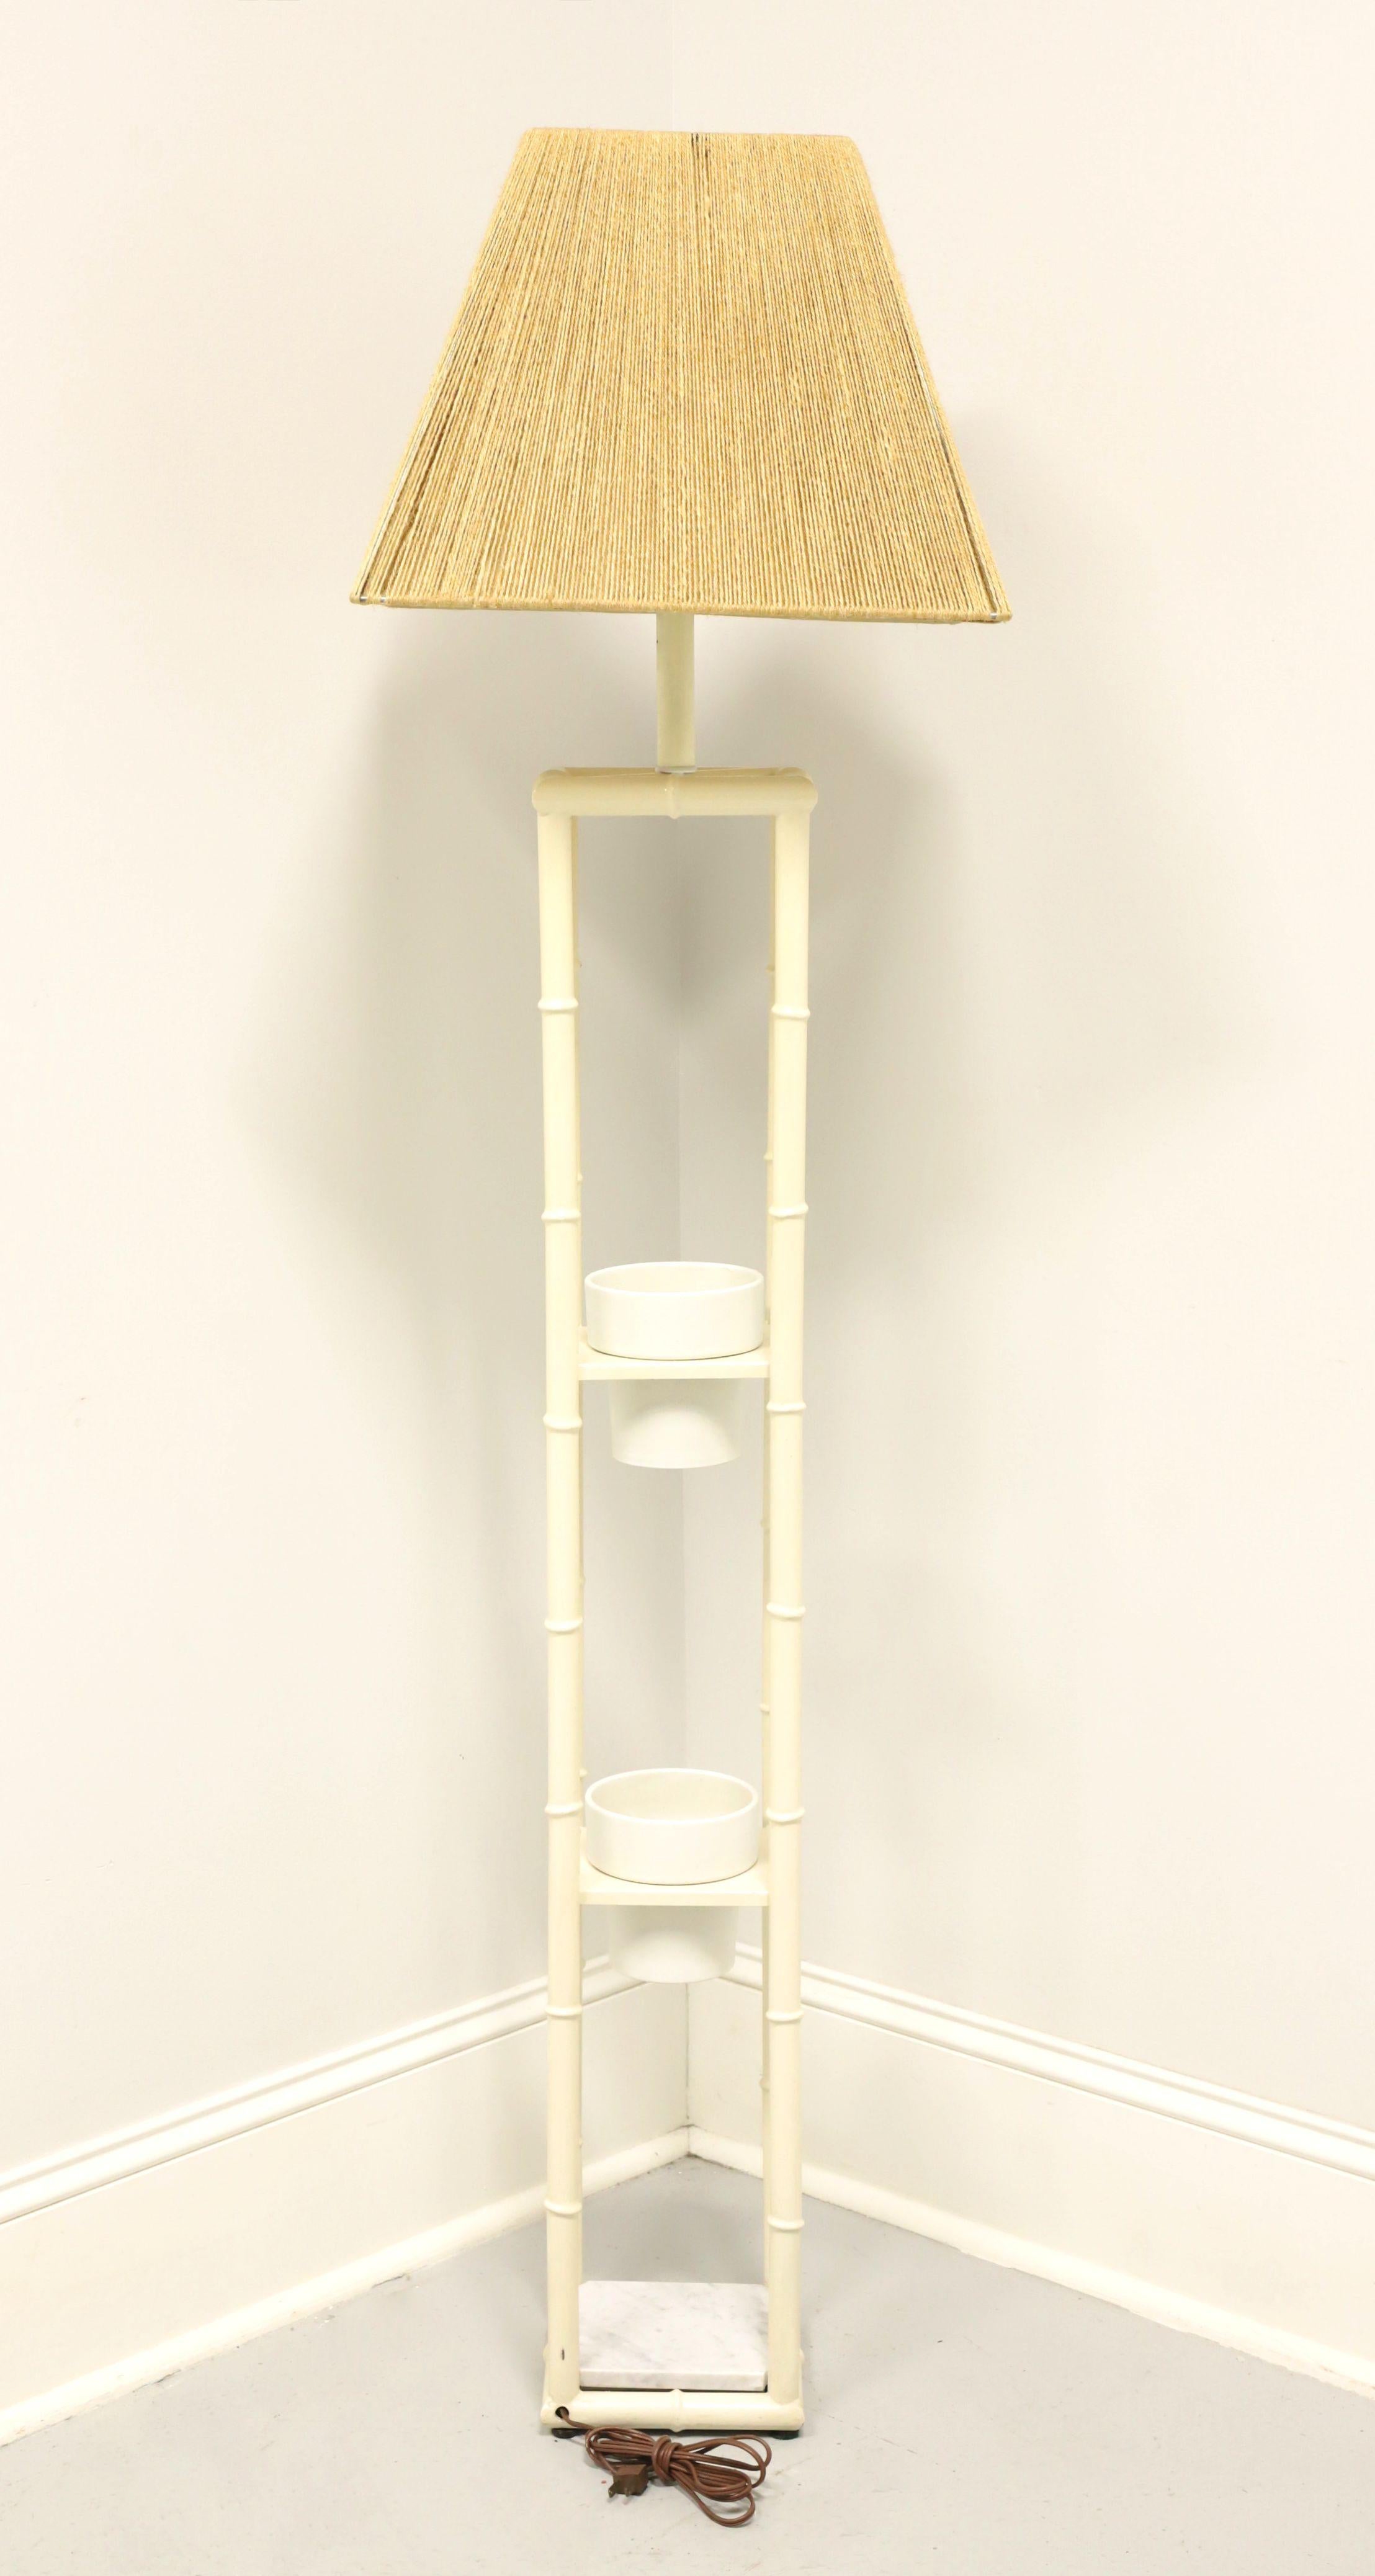 American Mid 20th Century White Painted Metal Faux Bamboo Floor Lamp W/ Shade For Sale